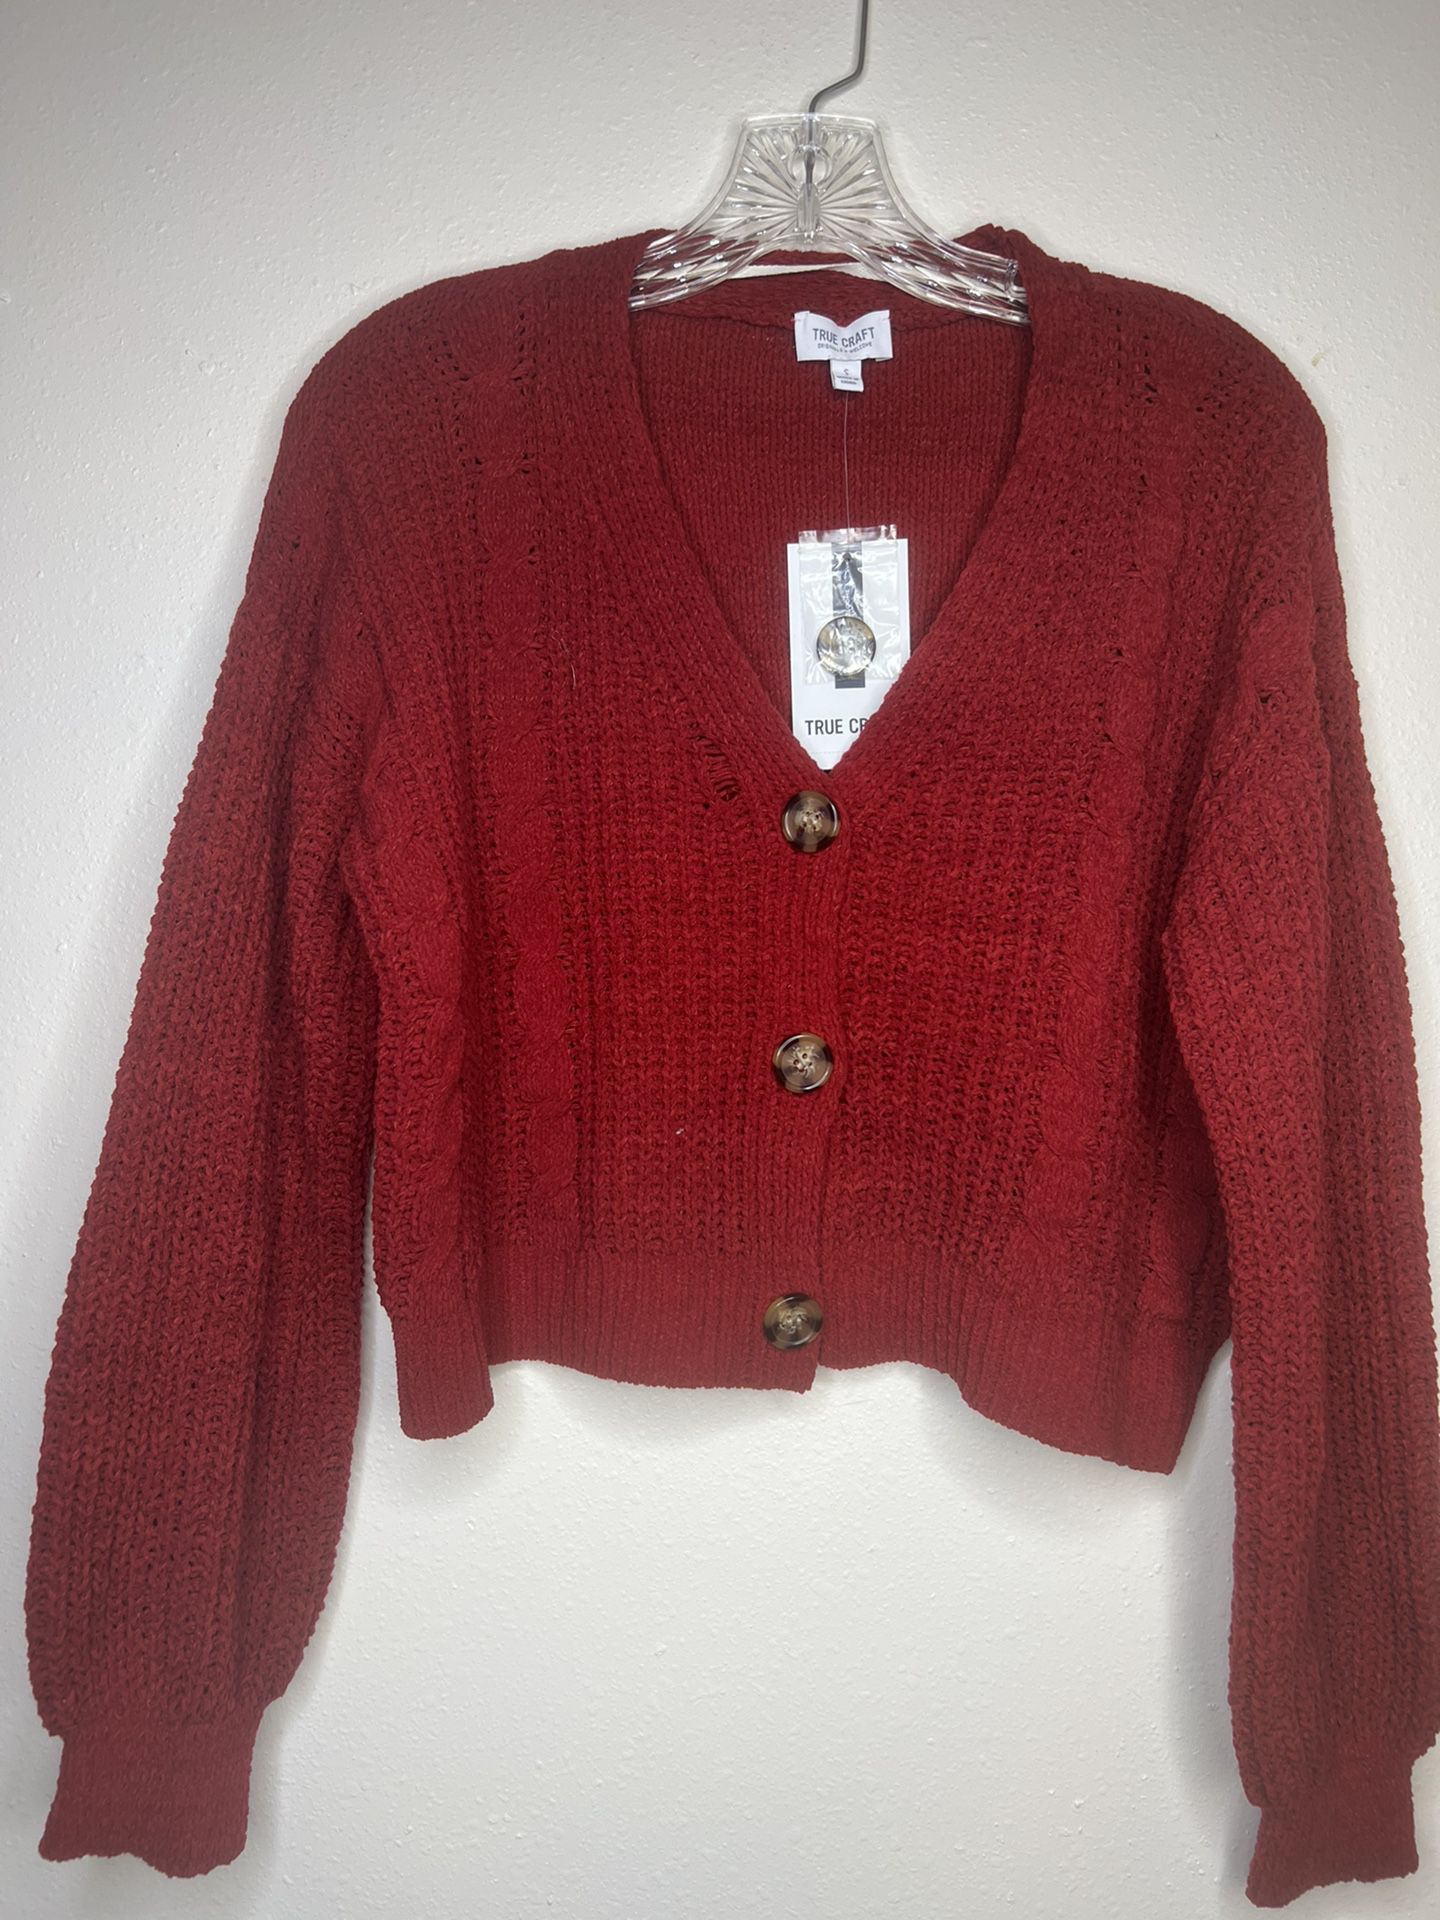 Woman’s Red Cable Knit Sweater - Size Small